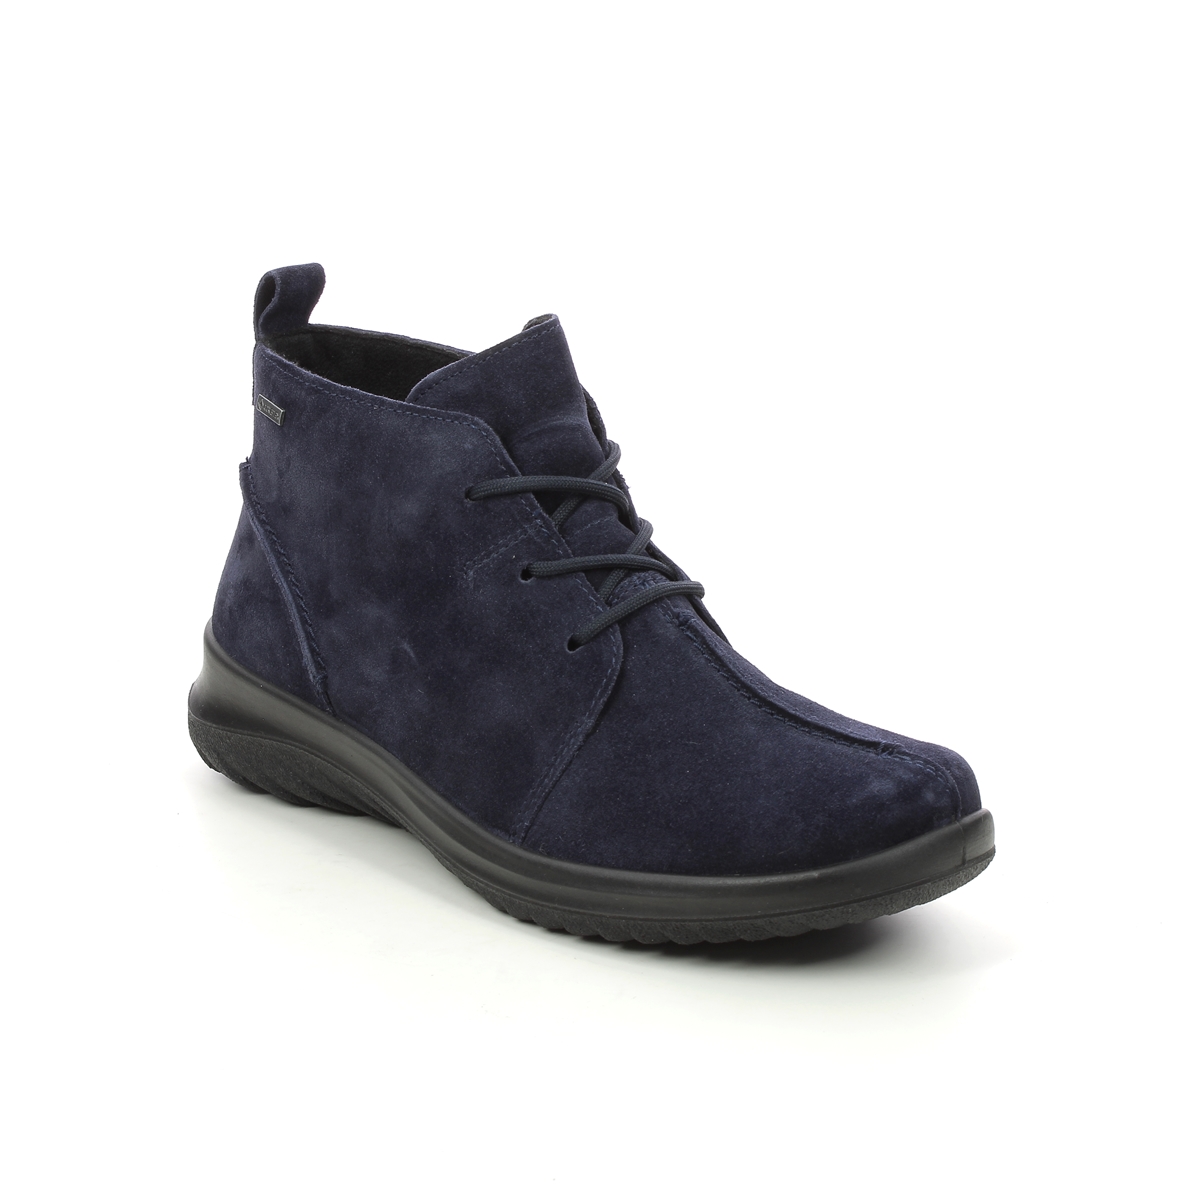 Legero Soft Lace Gtx Navy Suede Womens Lace Up Boots 2009569-8300 In Size 6.5 In Plain Navy Suede